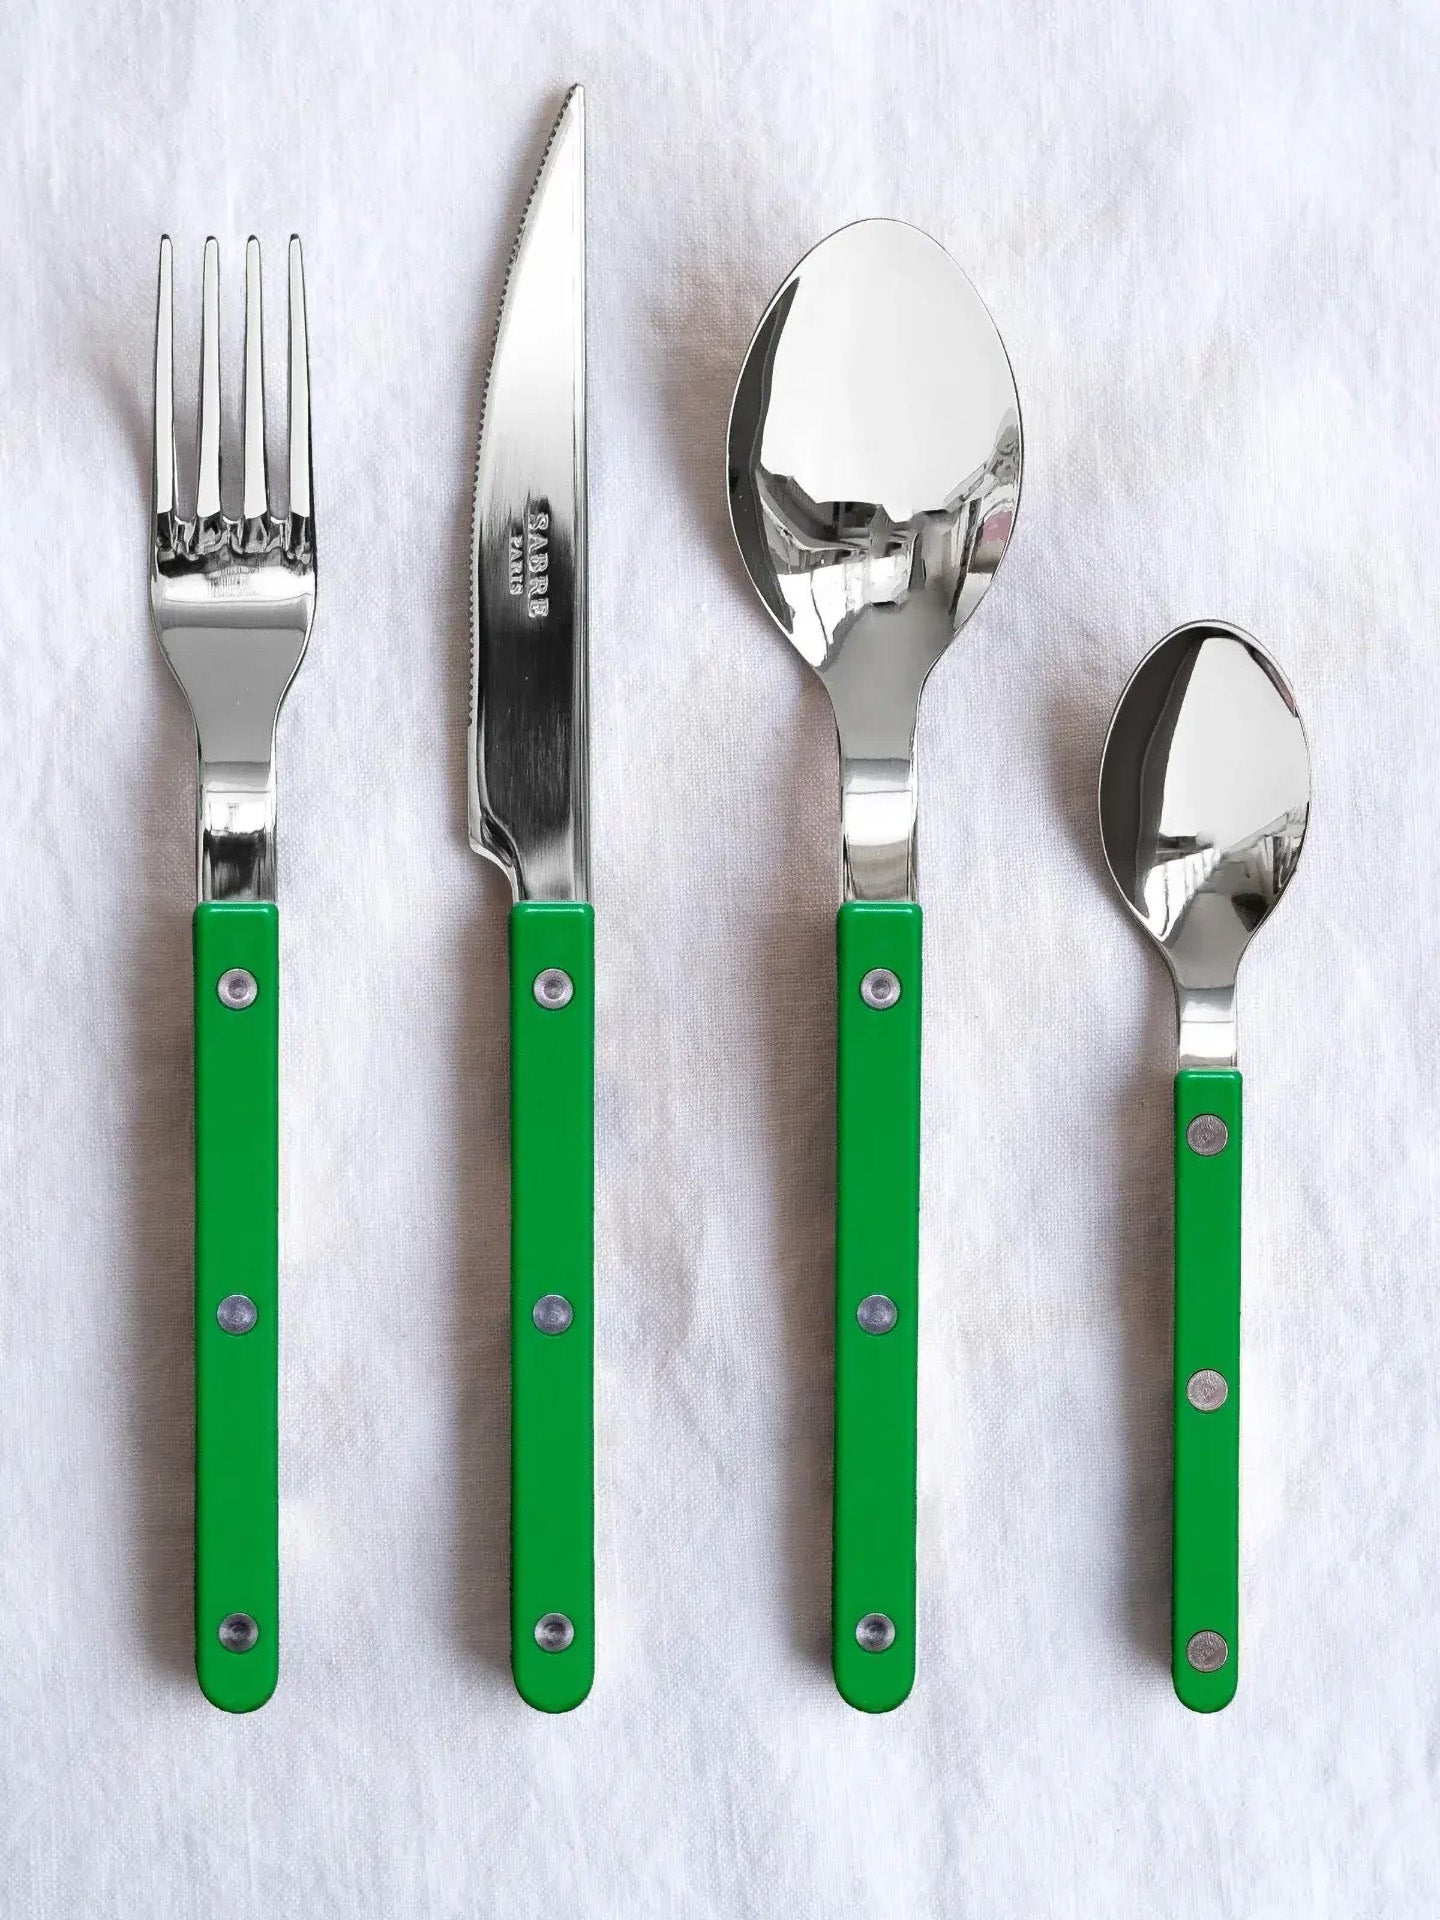 The garden green Bistrot dinner knife couples great with the dinner fork, soup spoon and the tea spoon of the same colour. But it's possible to mix them with other colours, too, as the cutleries are available to buy in single pieces.